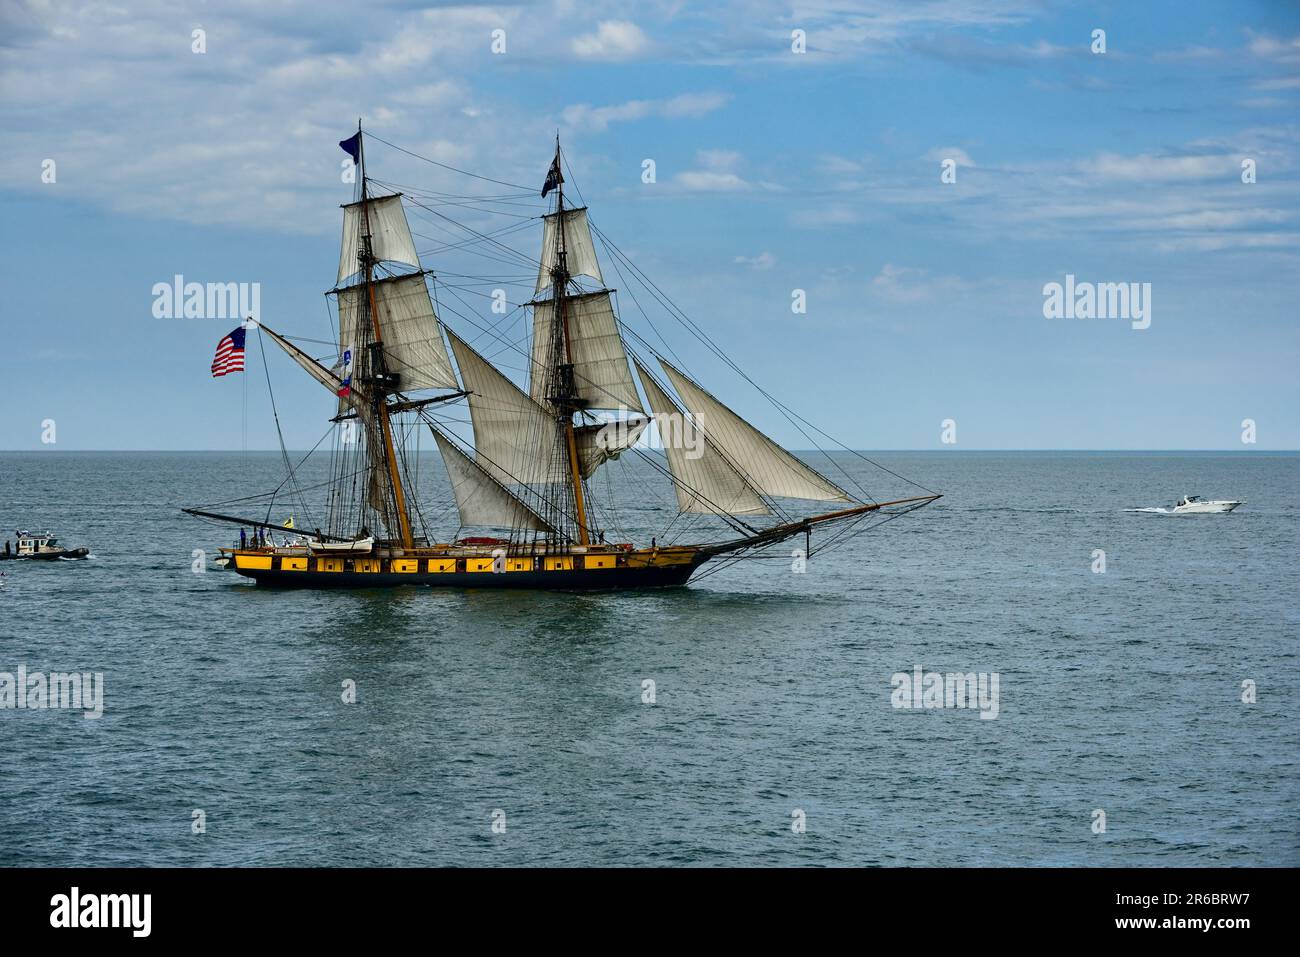 The US Brig Niagara, Commodore Oliver Hazard Perry’s flagship from the War of 1812, sails in the Cleveland Tall Ships festival in 2019. Stock Photo